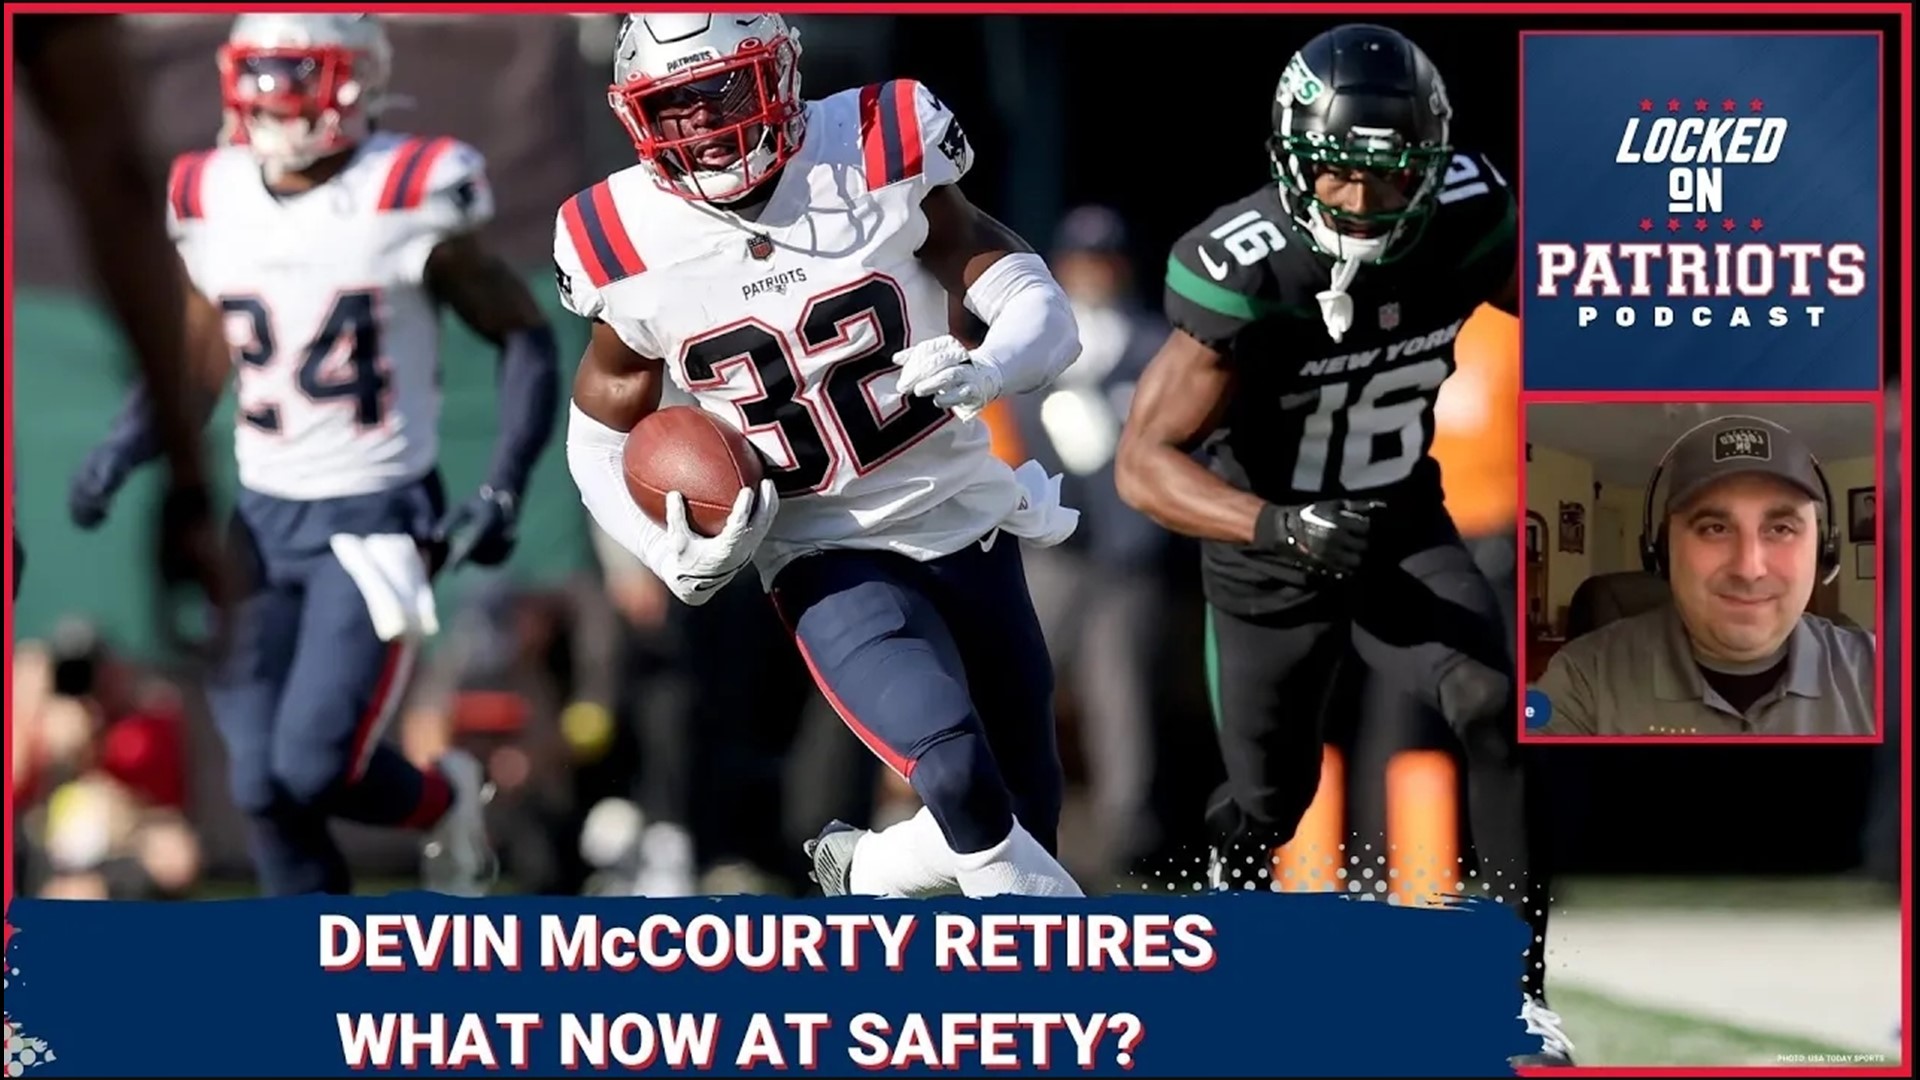 Prior to the start of the 2021 season, New England Patriots safety Devin McCourty was named a team captain for the 12th time in his career.